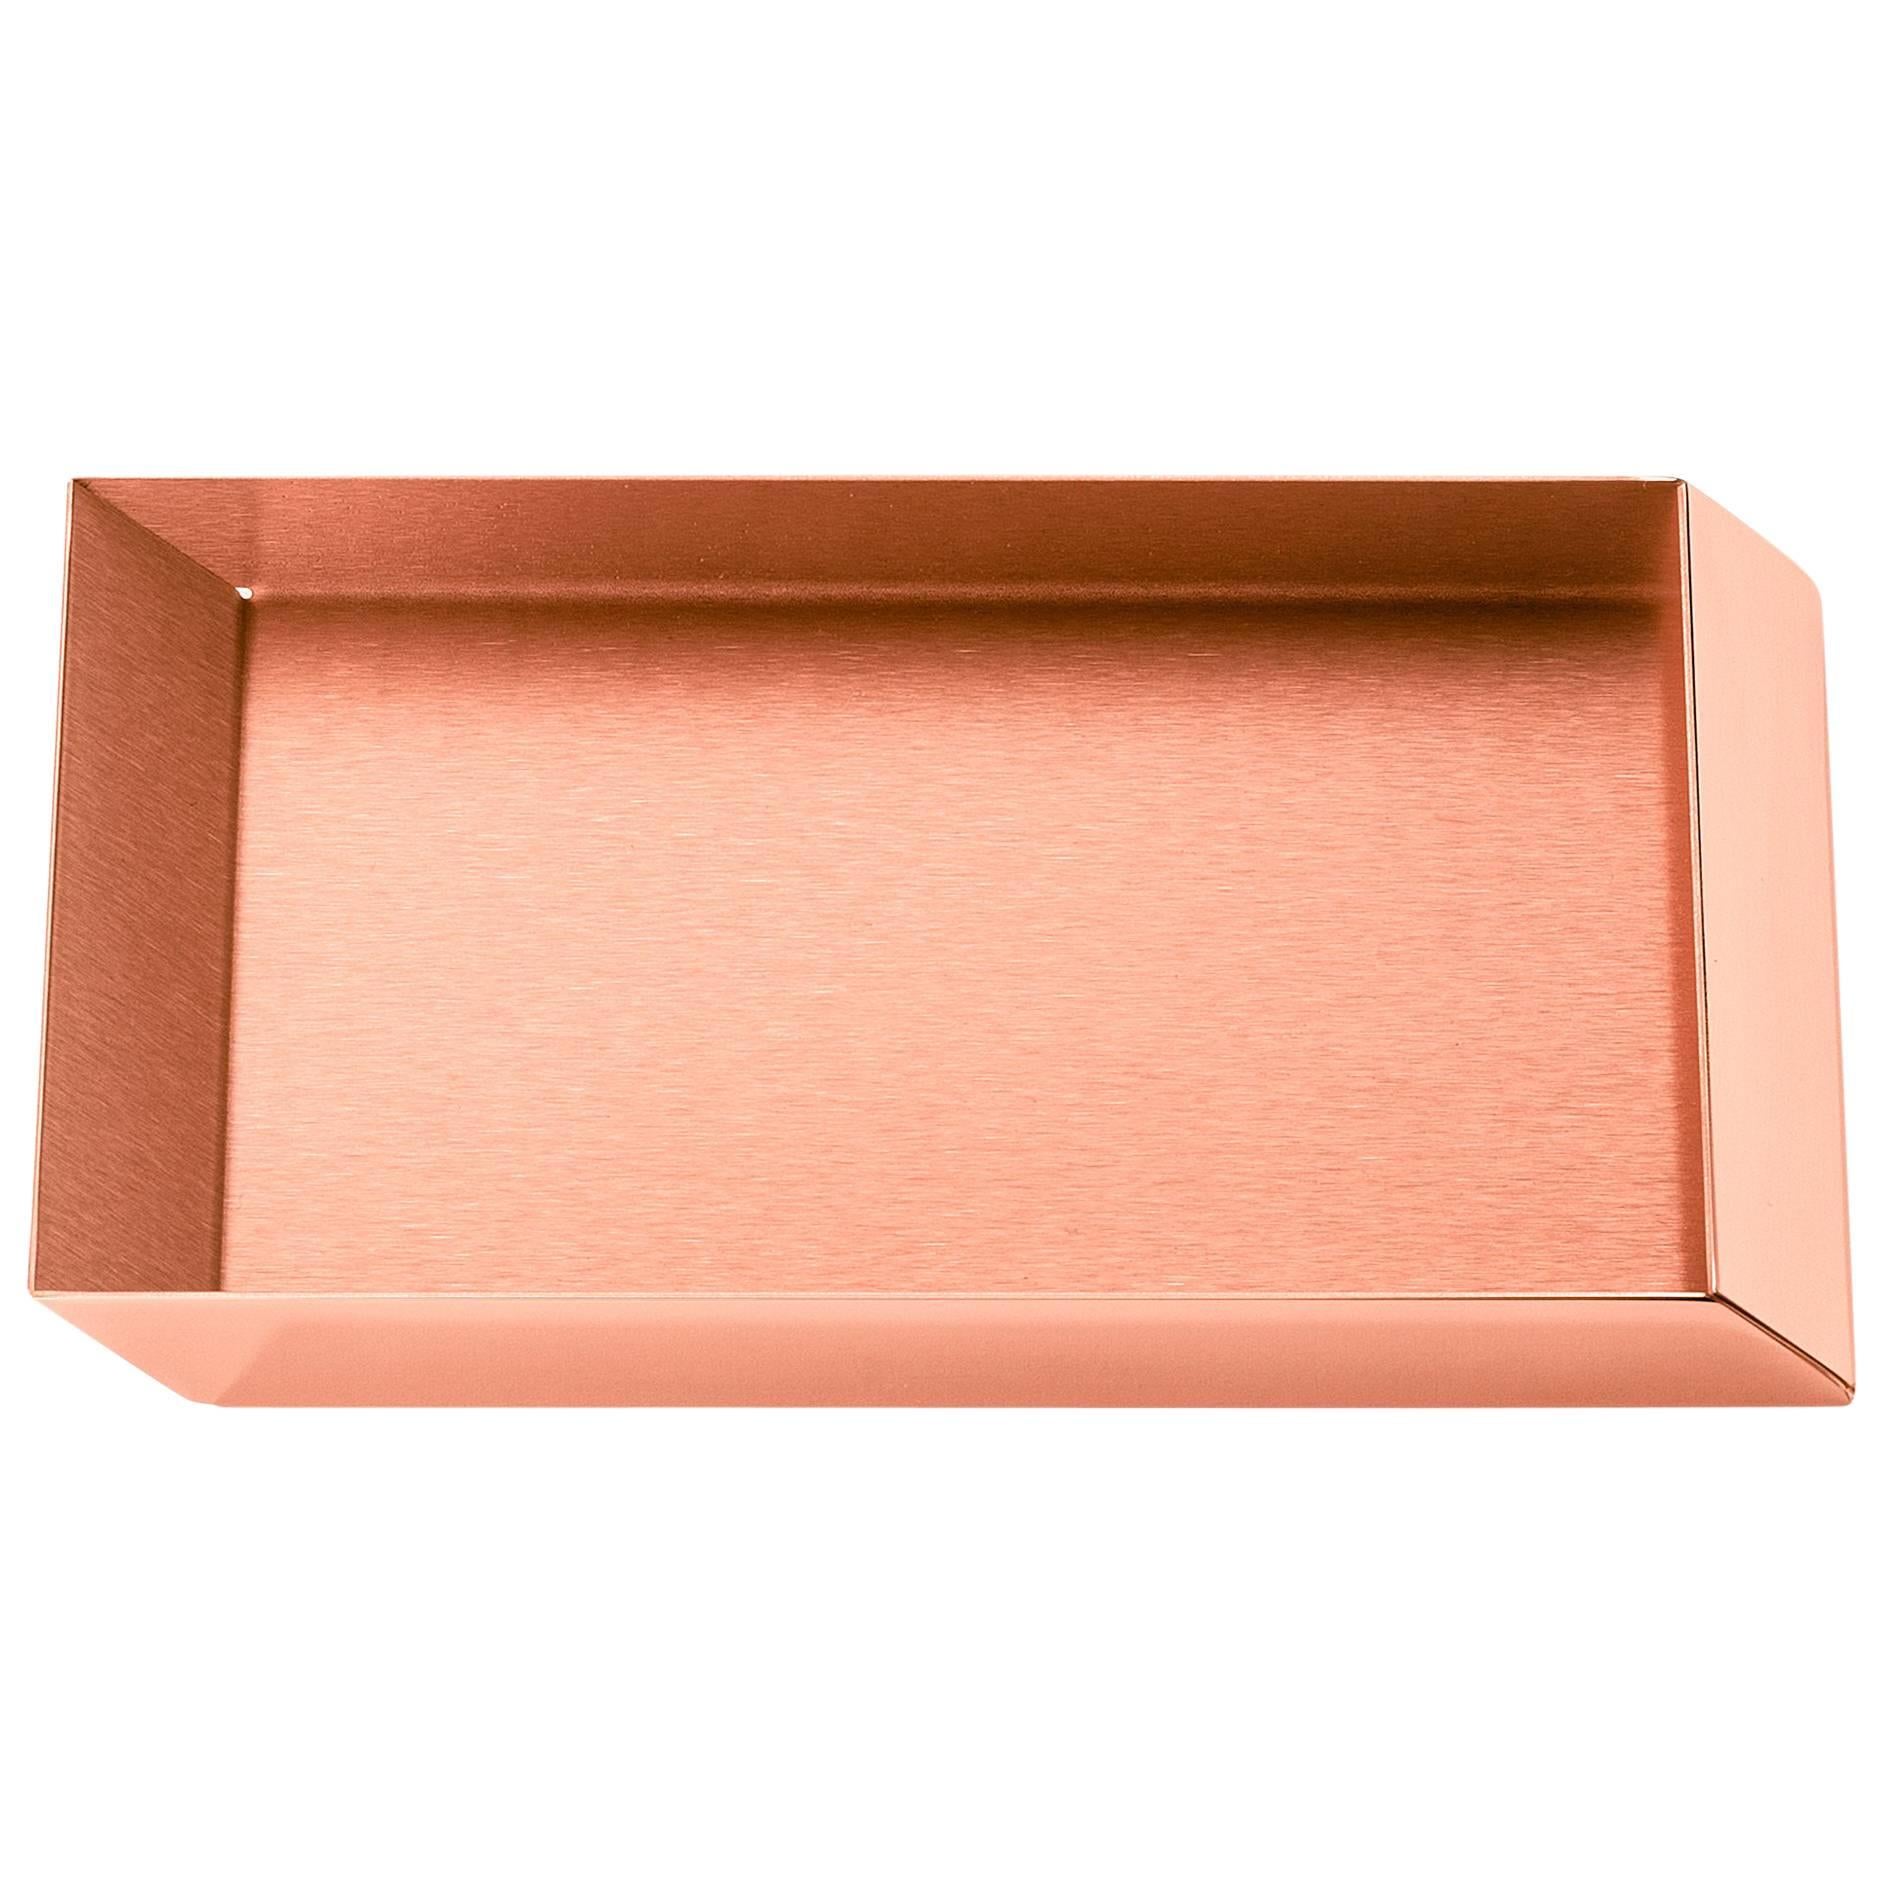 Ghidini 1961 Axonometry Rectangular Small Tray in Rose Gold Finish For Sale